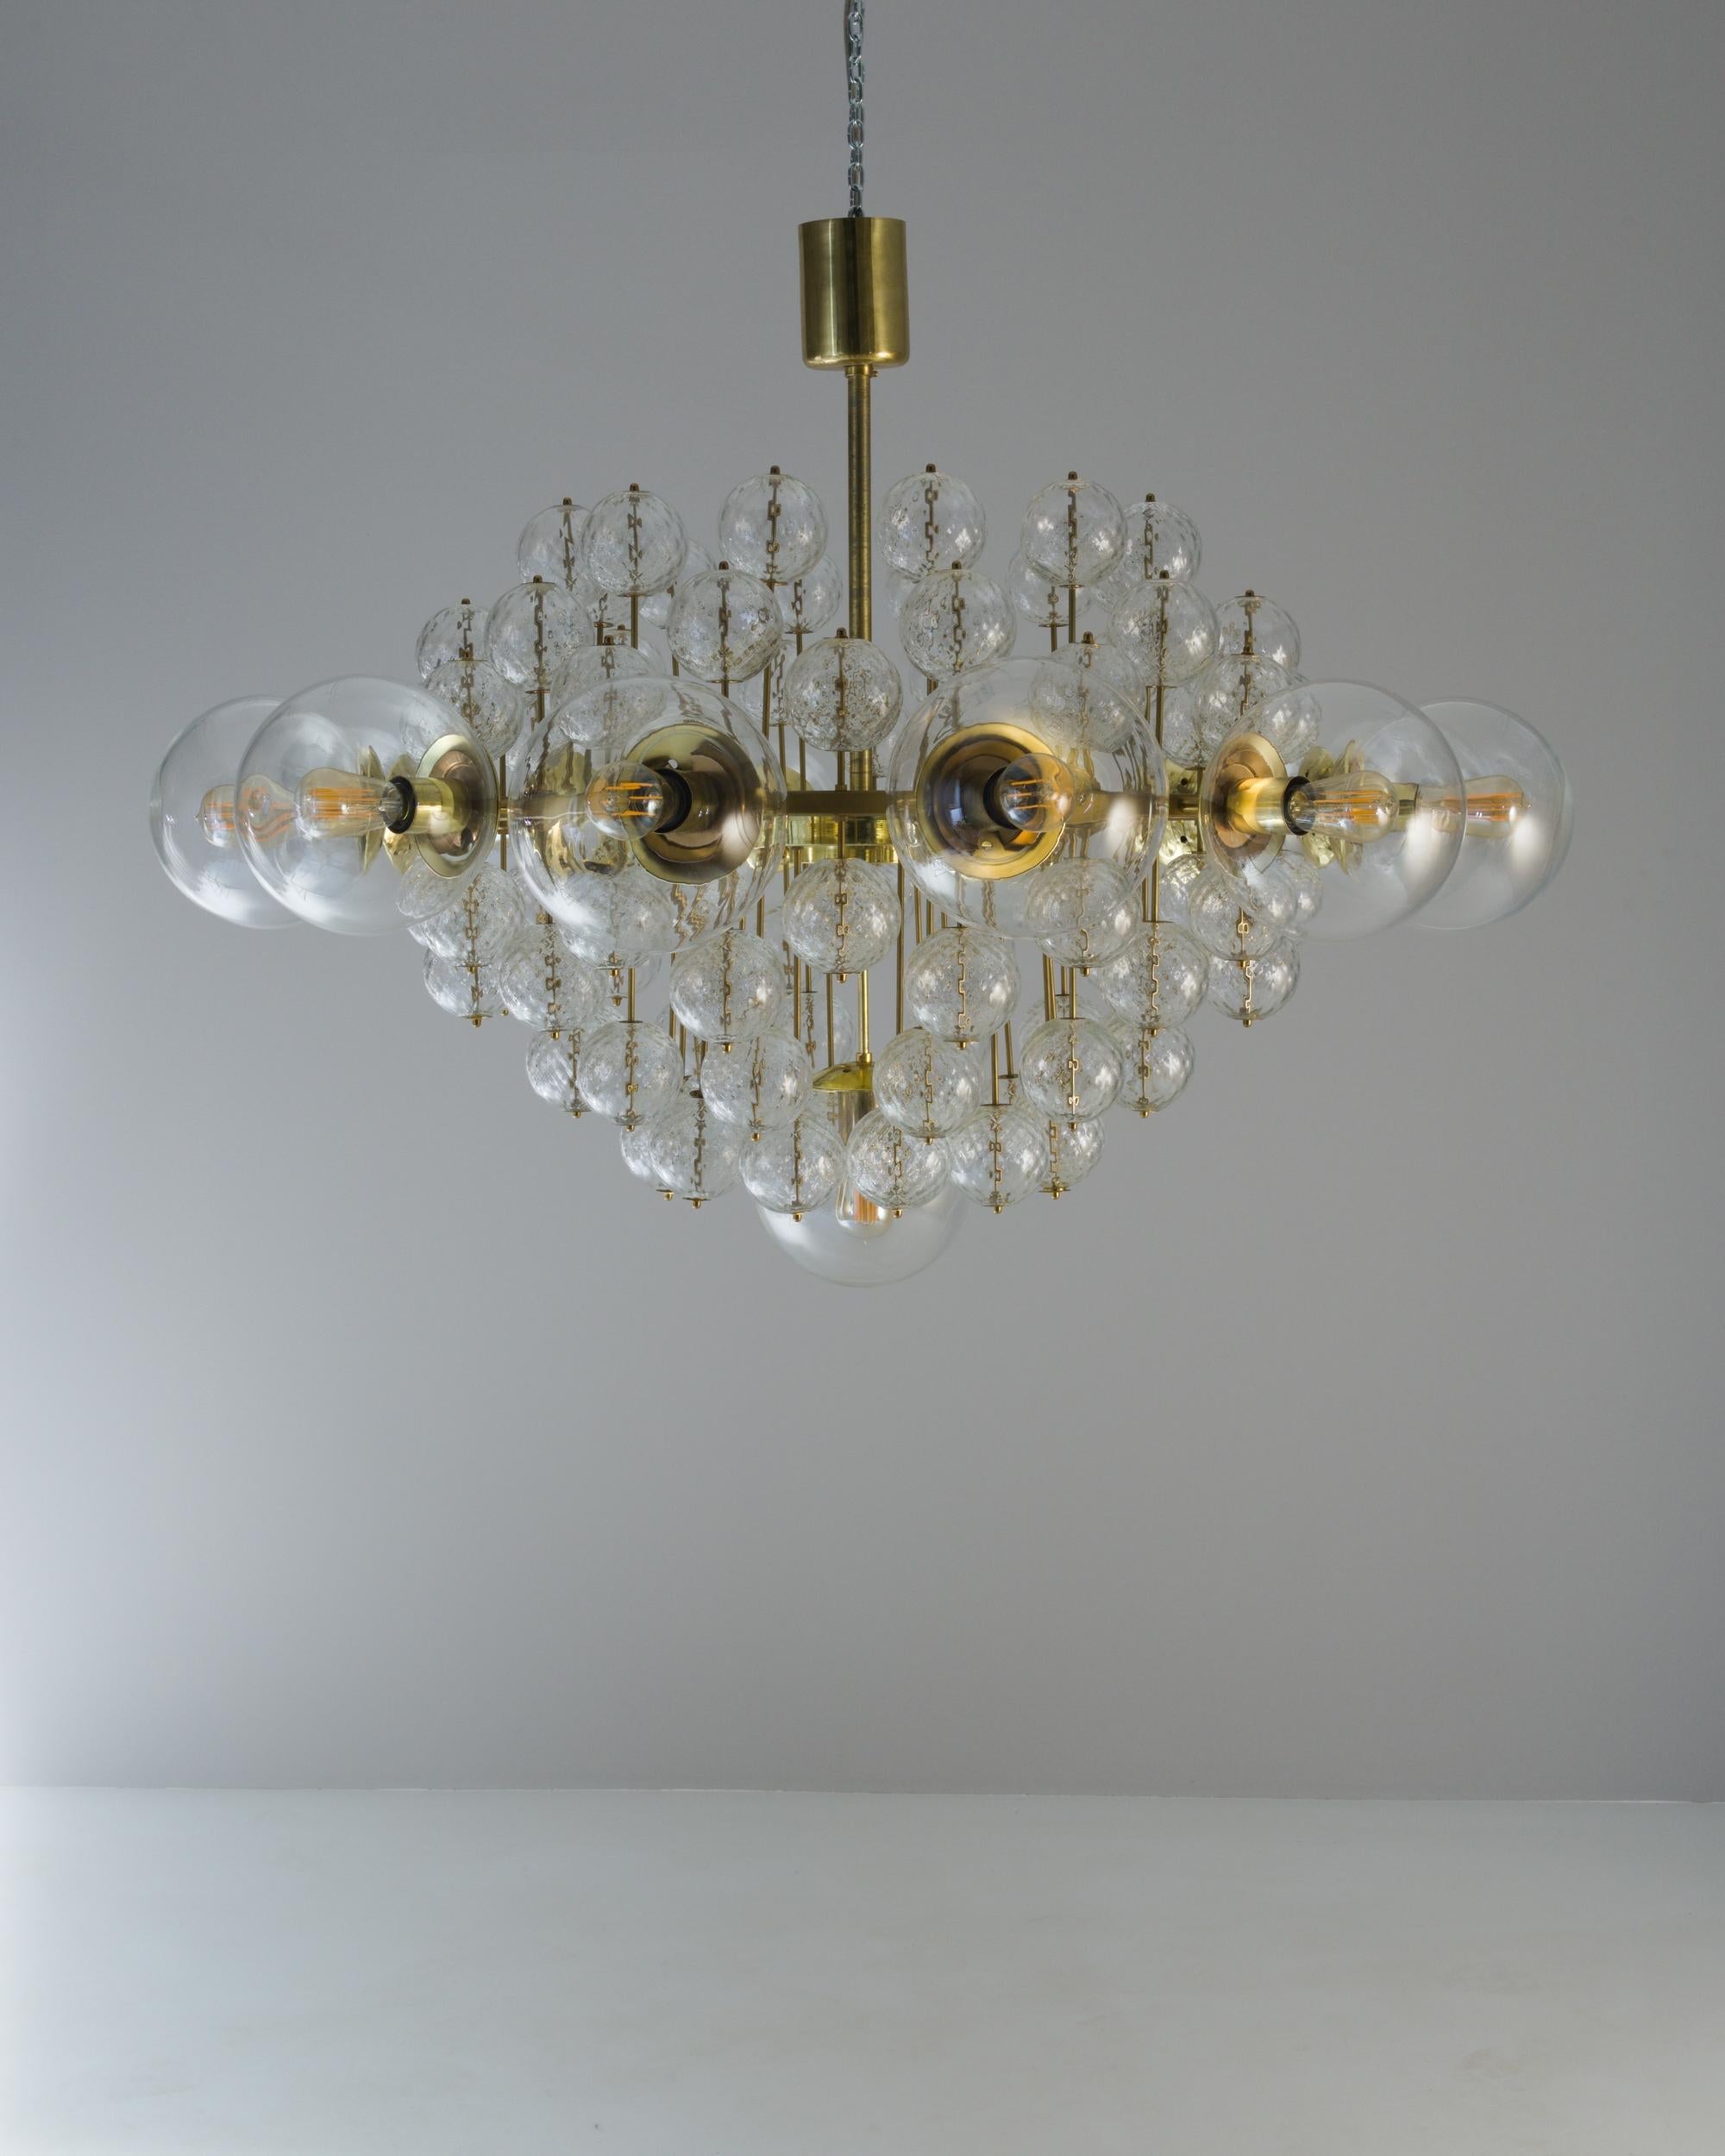 A metal and glass chandelier made in 1970s Czechia. Blending both mid-century and Art Deco sensibilities, this illustrious and mesmerizing chandelier exudes a chic and inspiring energy. With numerous, clustered glass balls blooming from the center